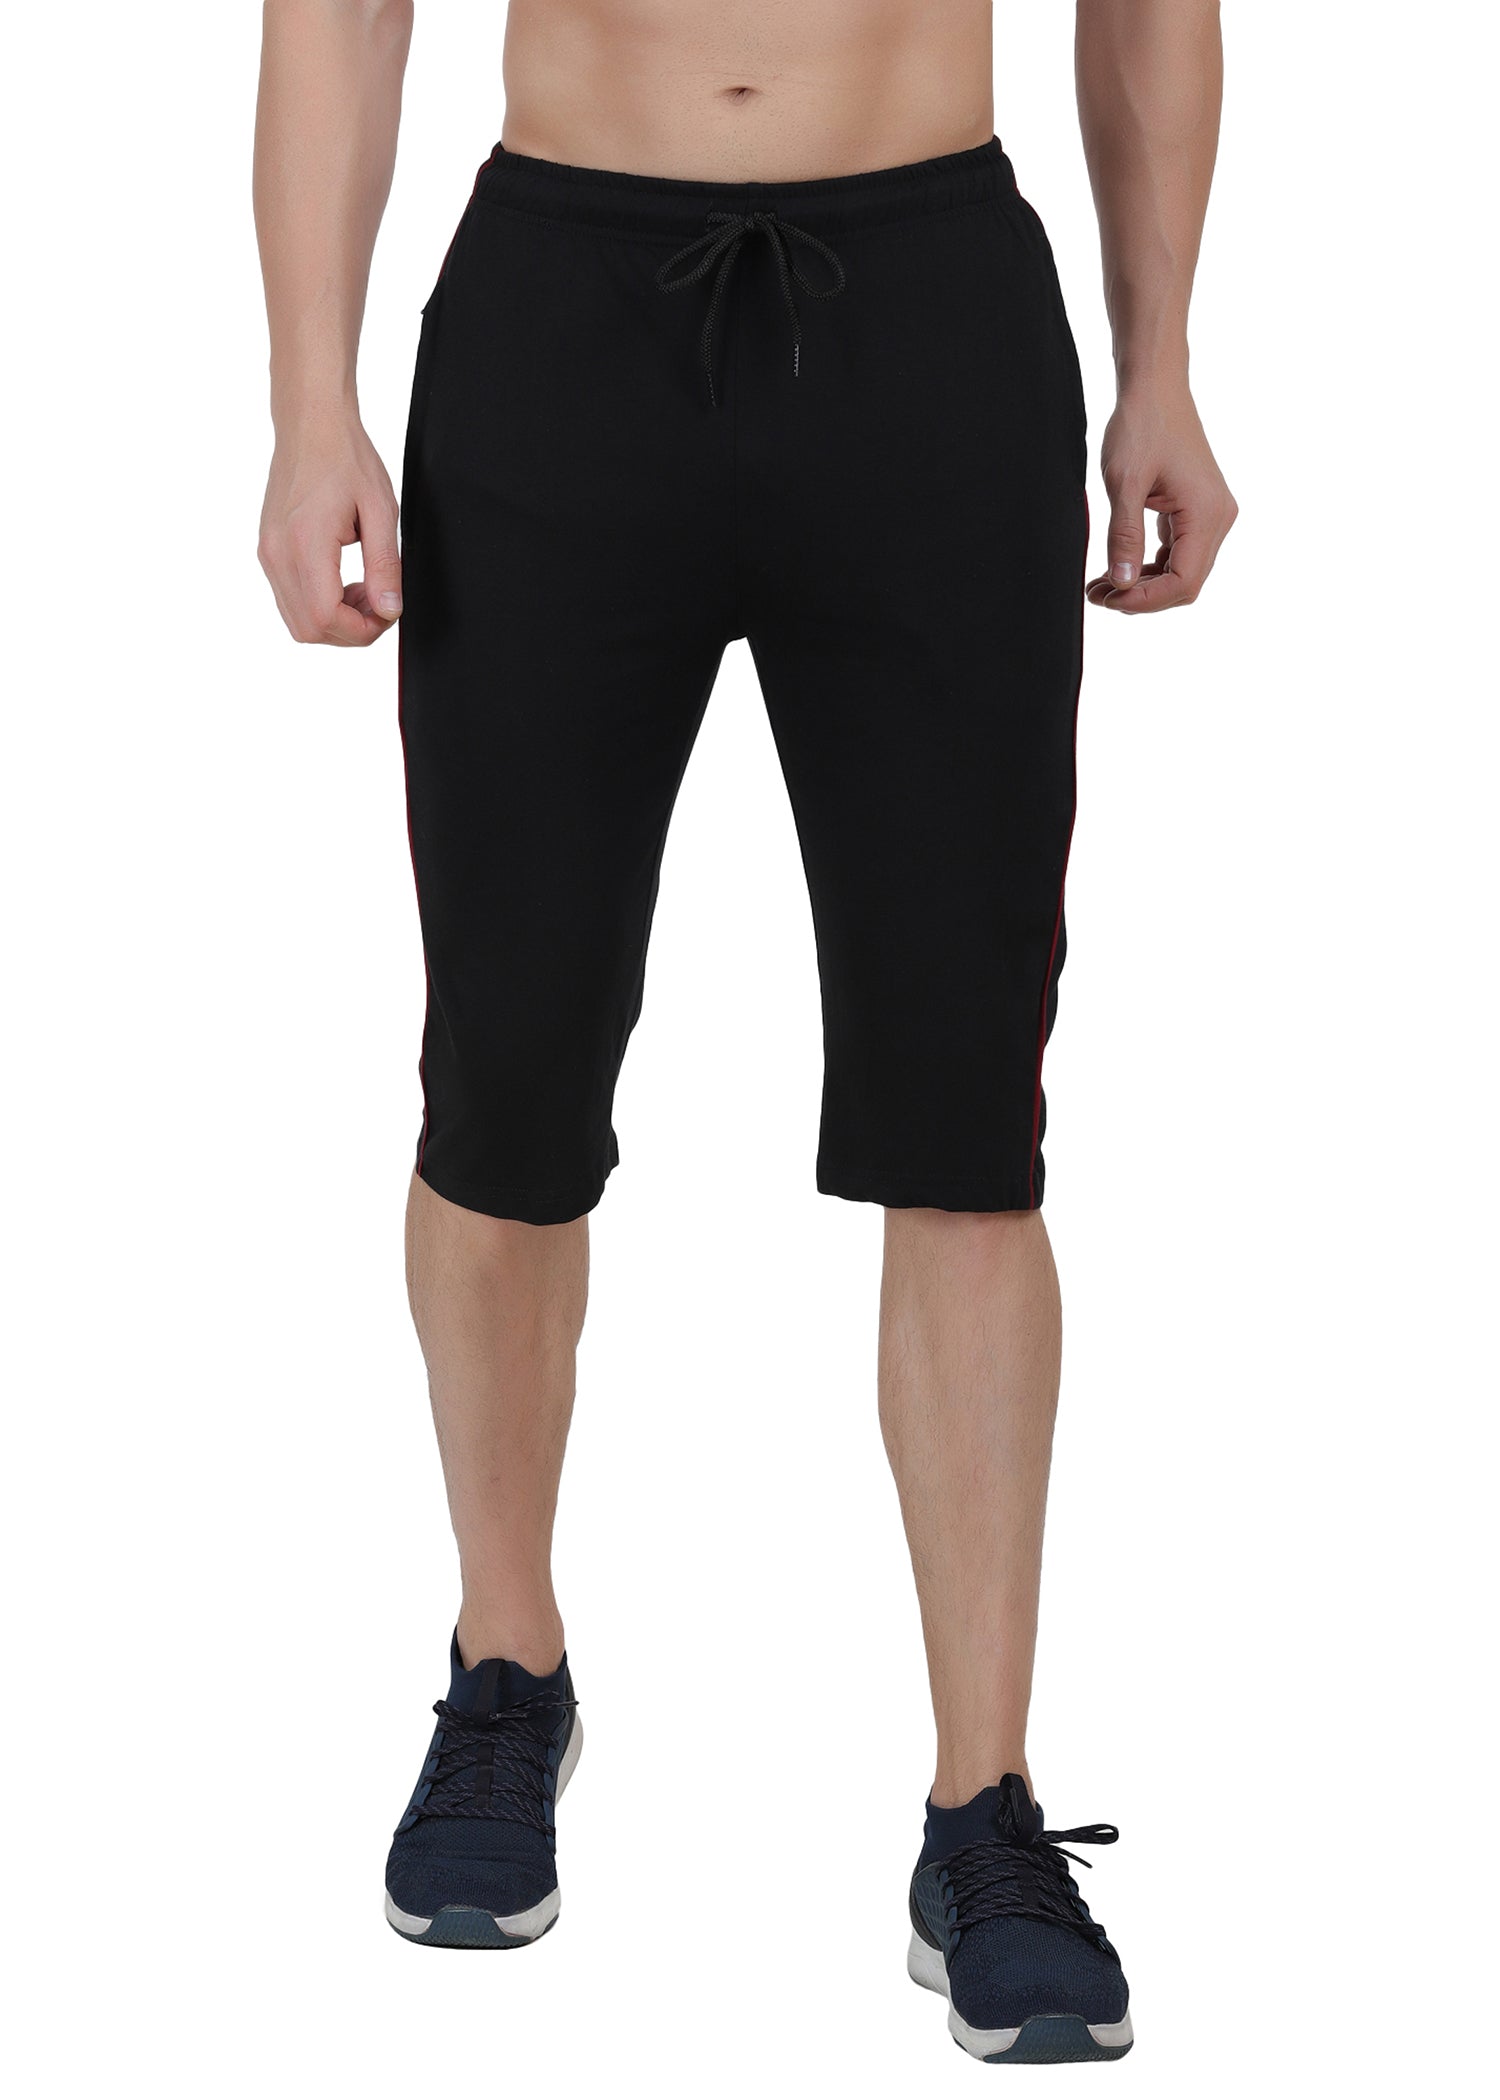 Buy Easy 2 Wear  Men Comfort Fit Knitted 34th Pants S to 5XLCapri Pants  Black at Amazonin